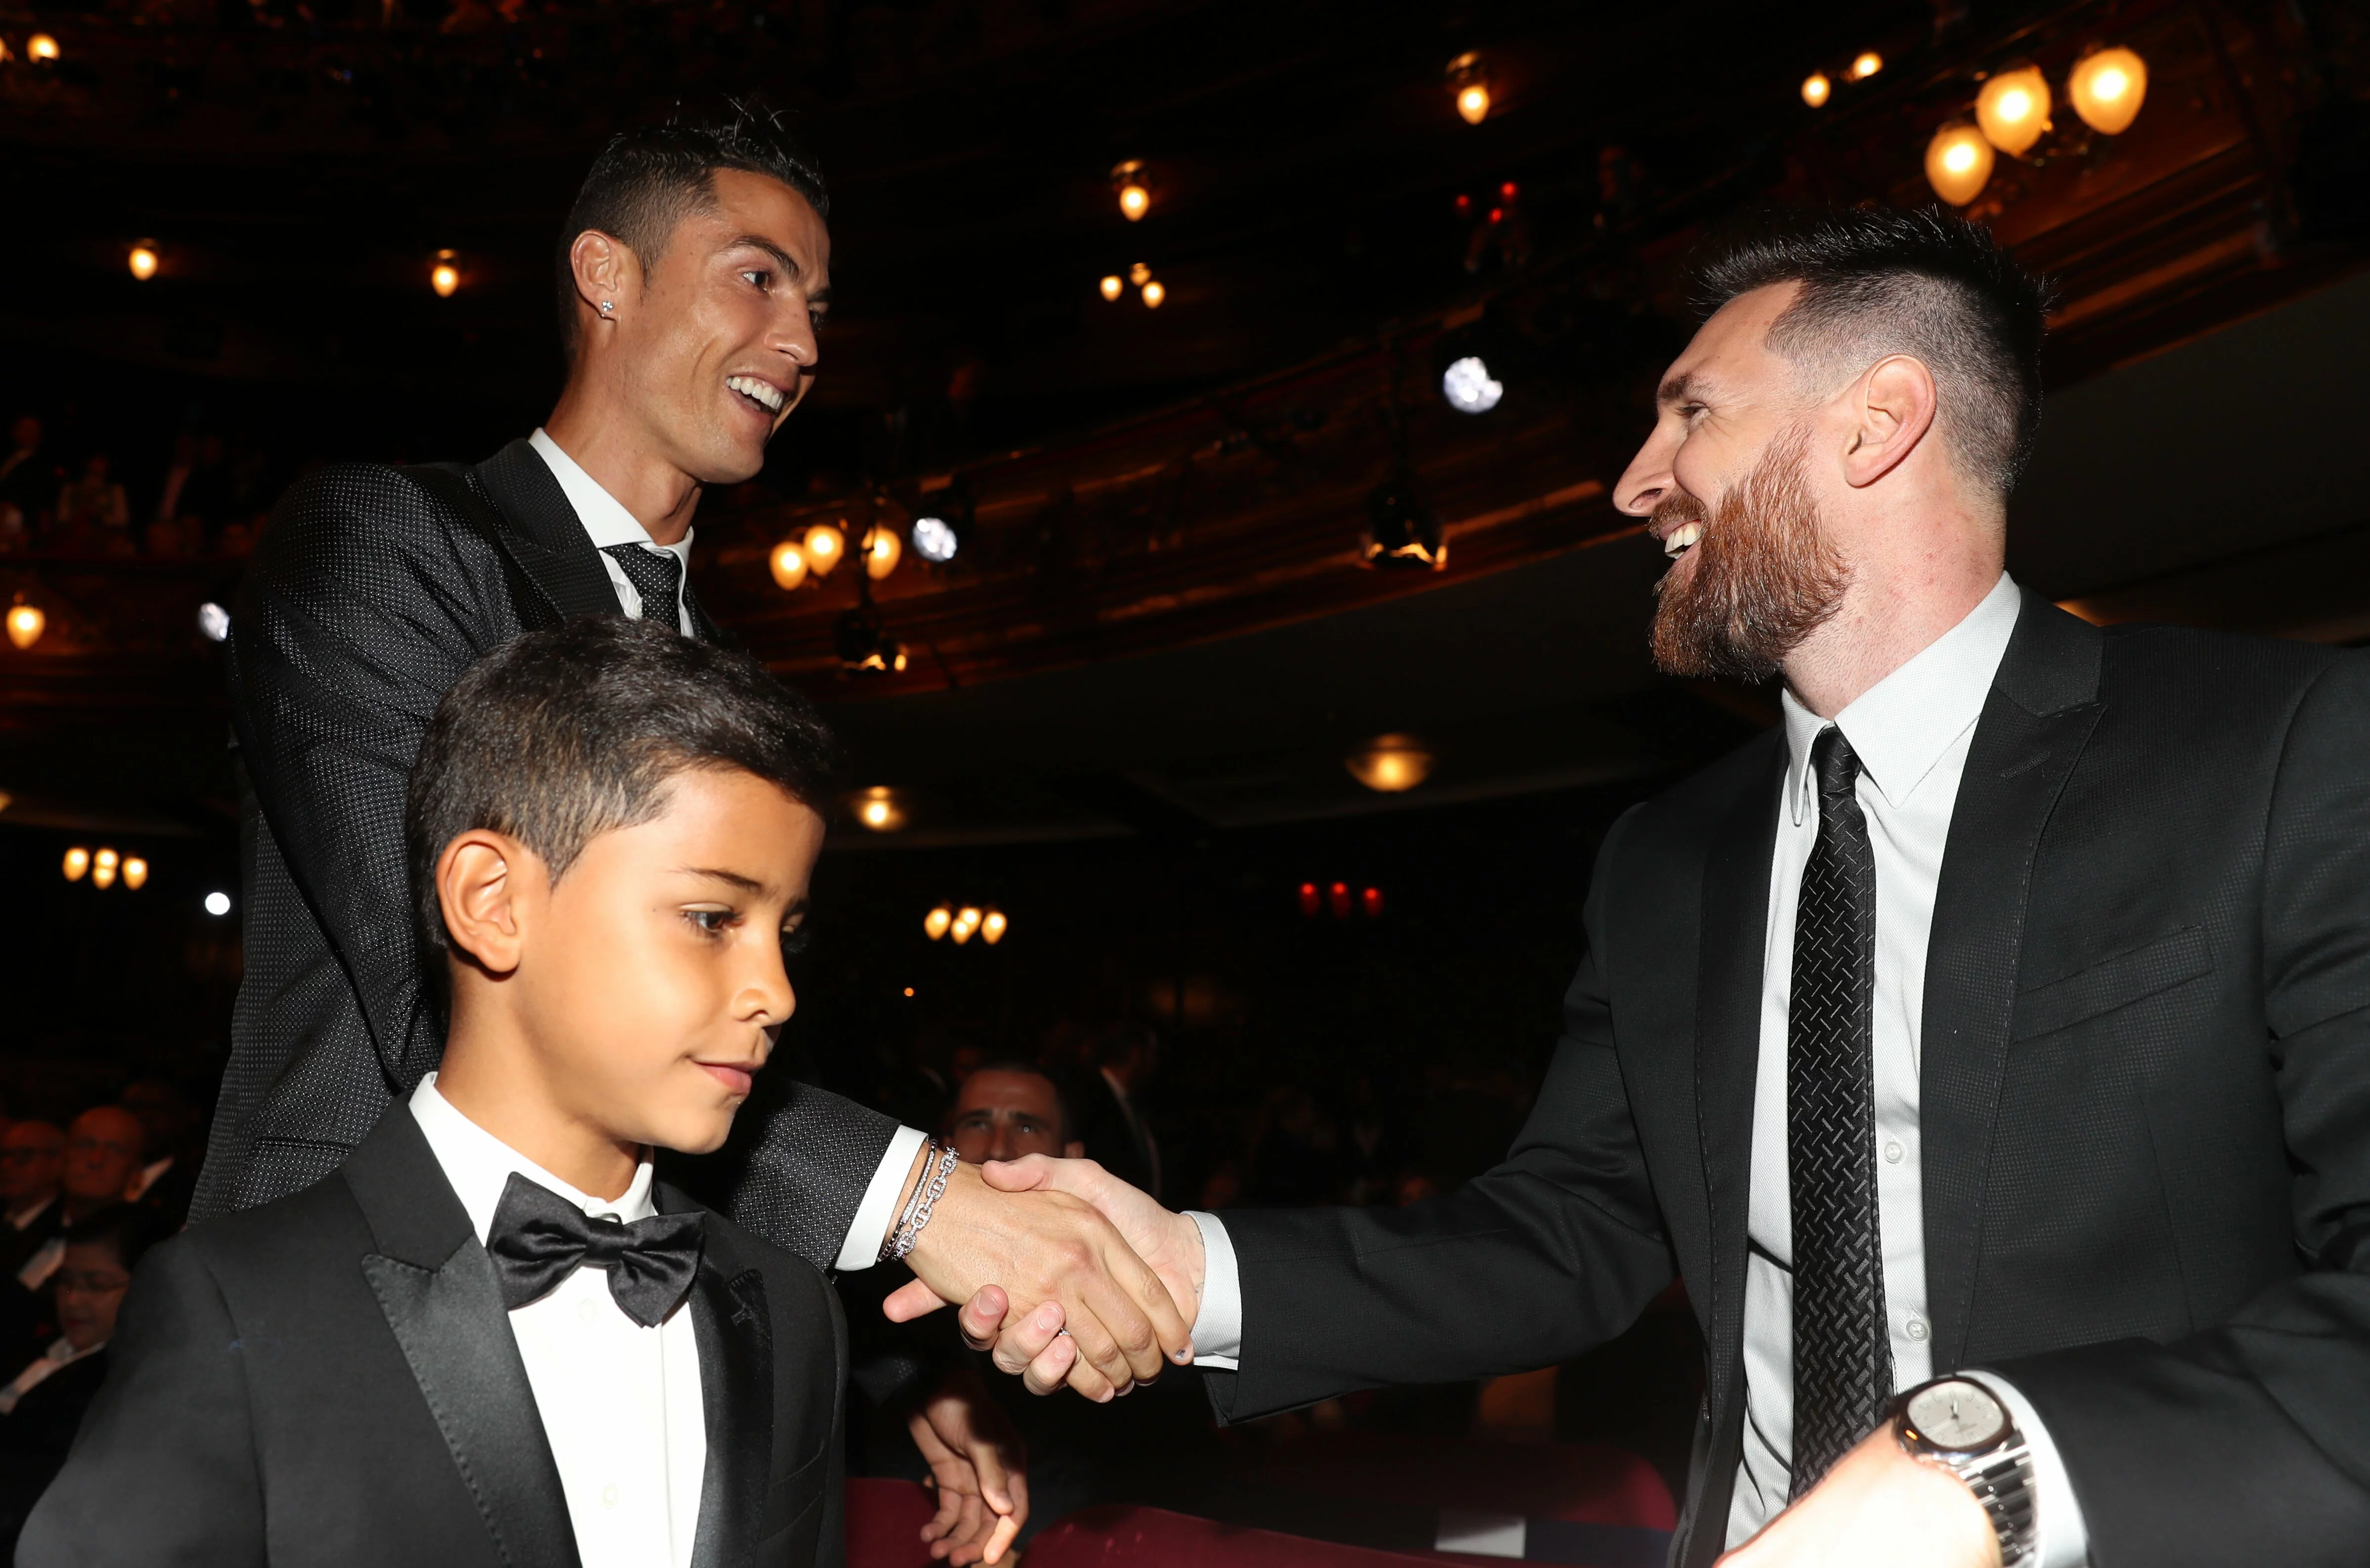 Cristiano Ronaldo Is The Most Admired Sportsman In 2019 - FootyNews.co.uk